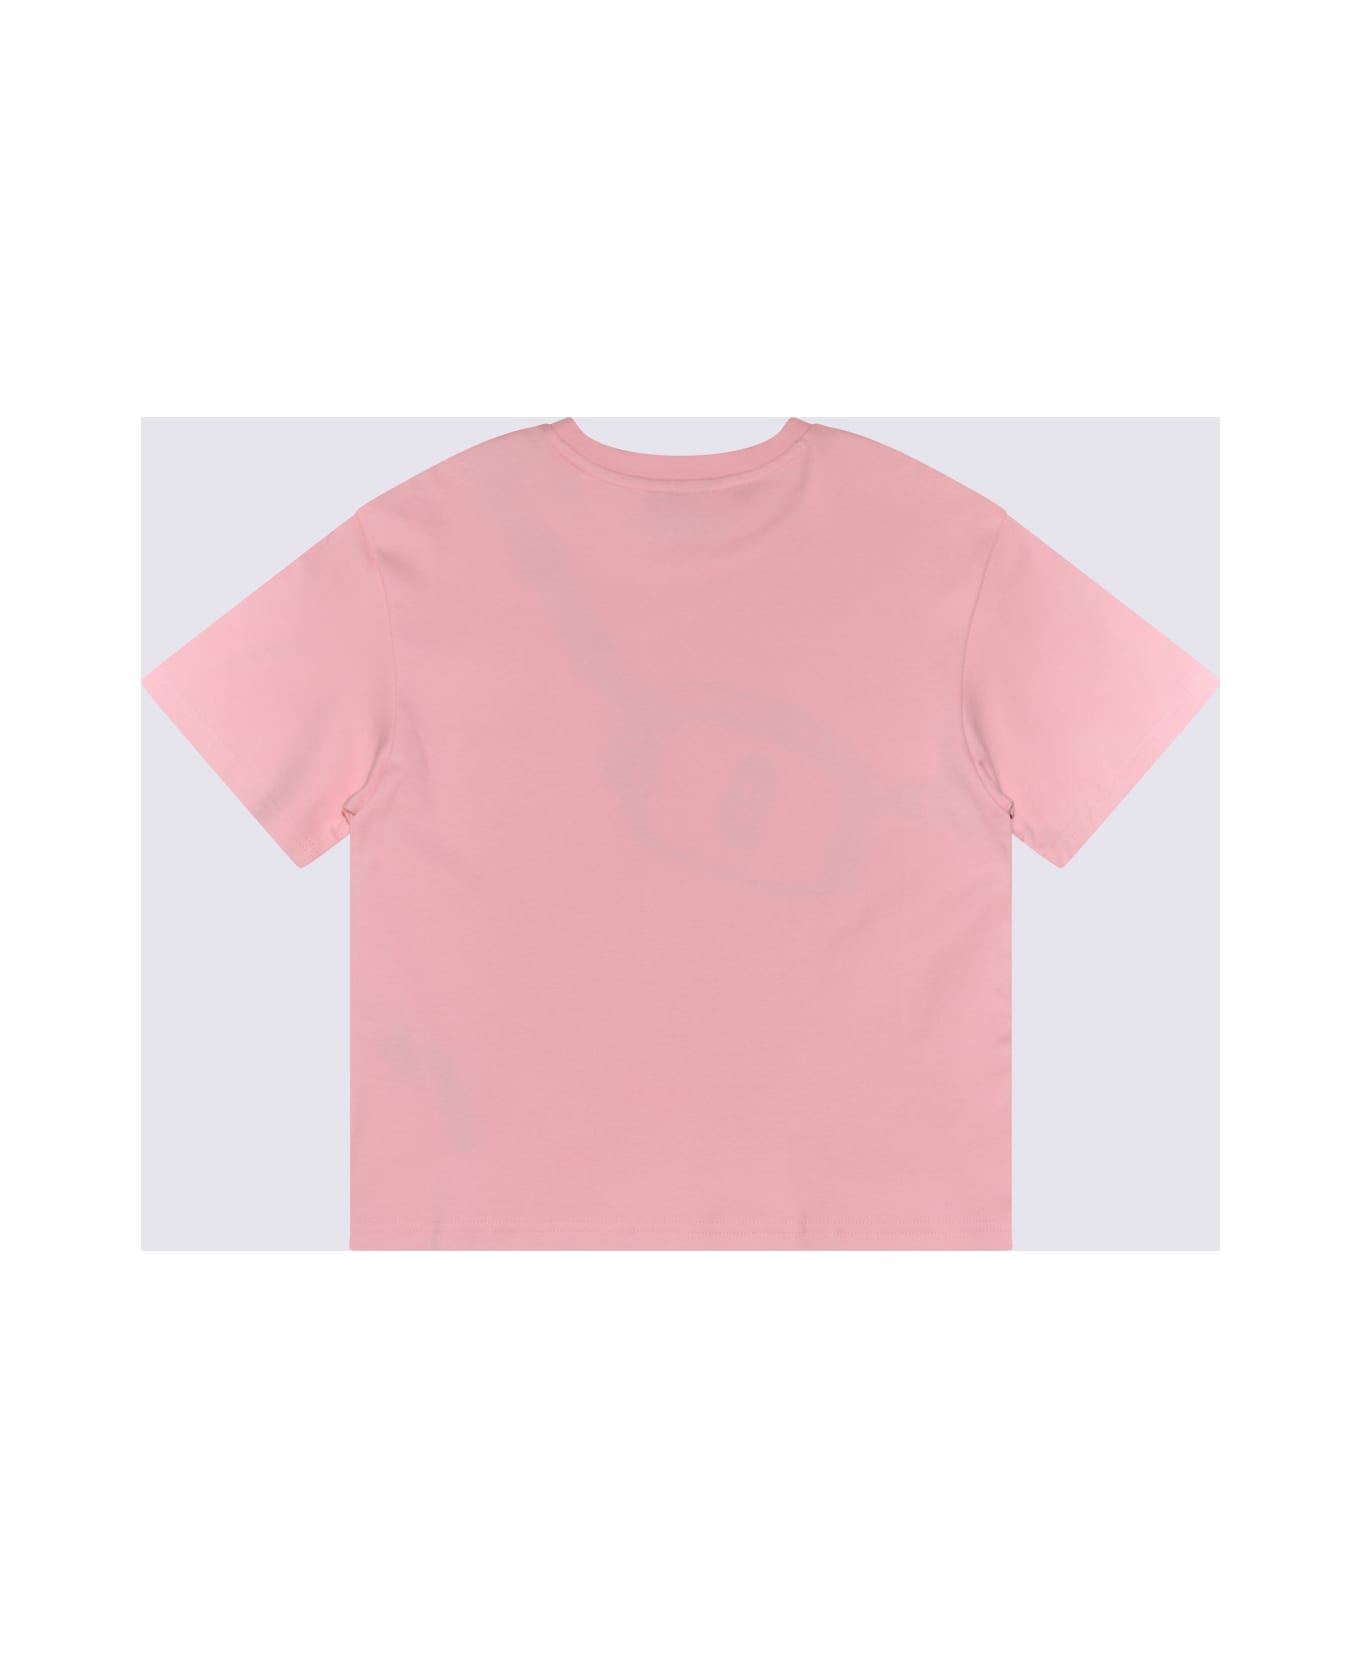 Marc Jacobs Pink, White And Black Cotton T-shirt - Pink